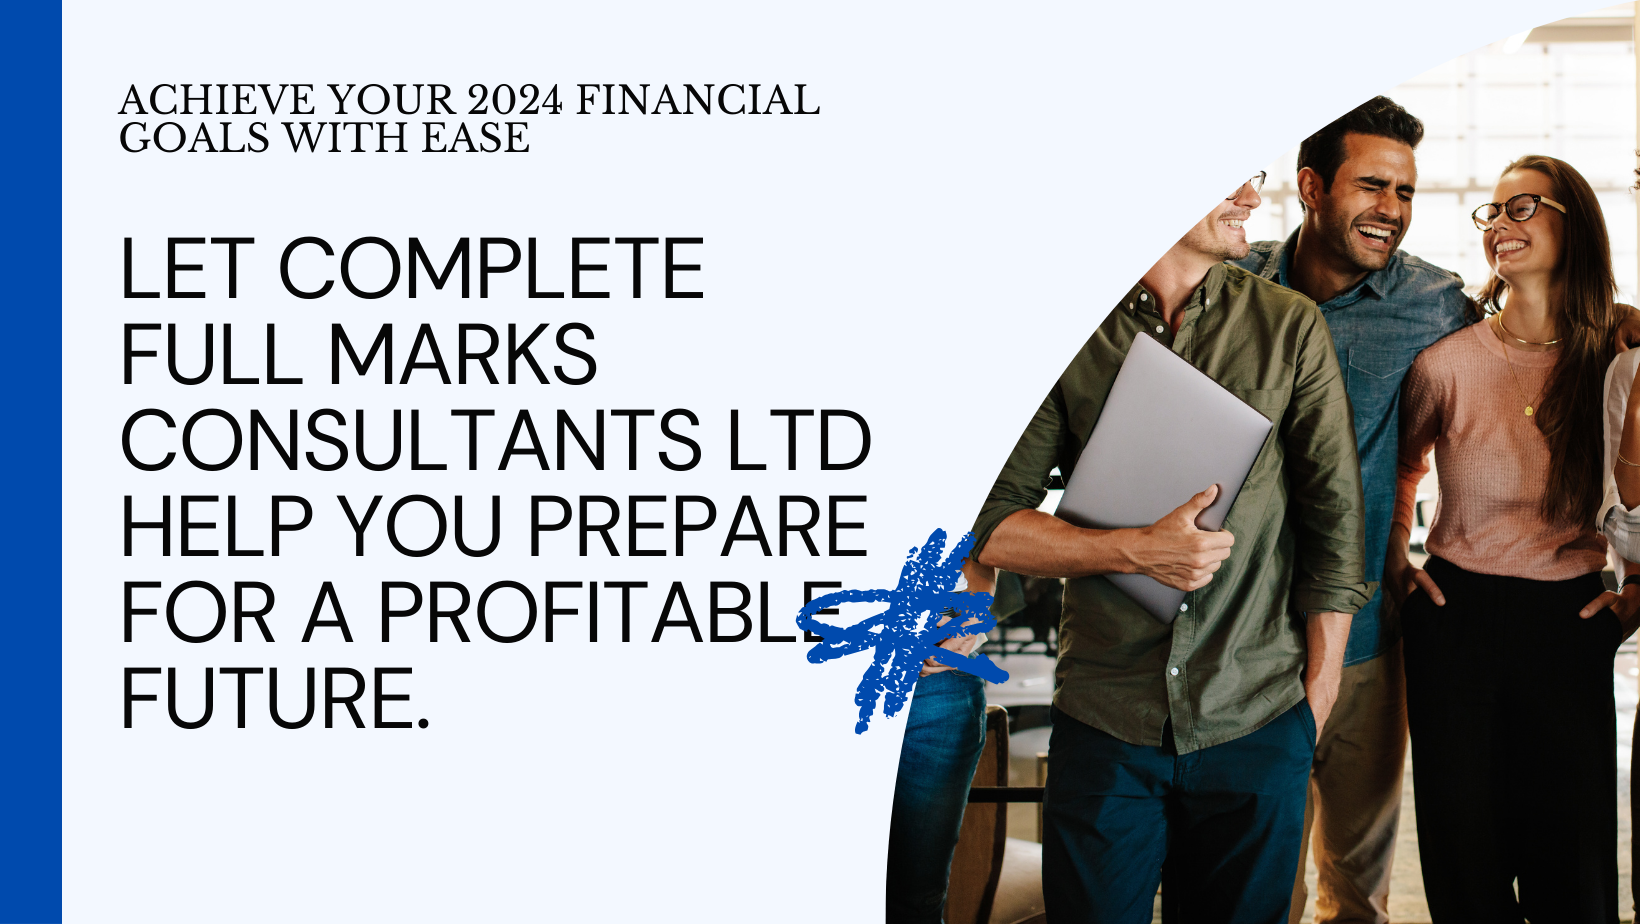 Setting 2024 business financial goals made easy. See what Complete Full Marks Consultants Ltd offers.